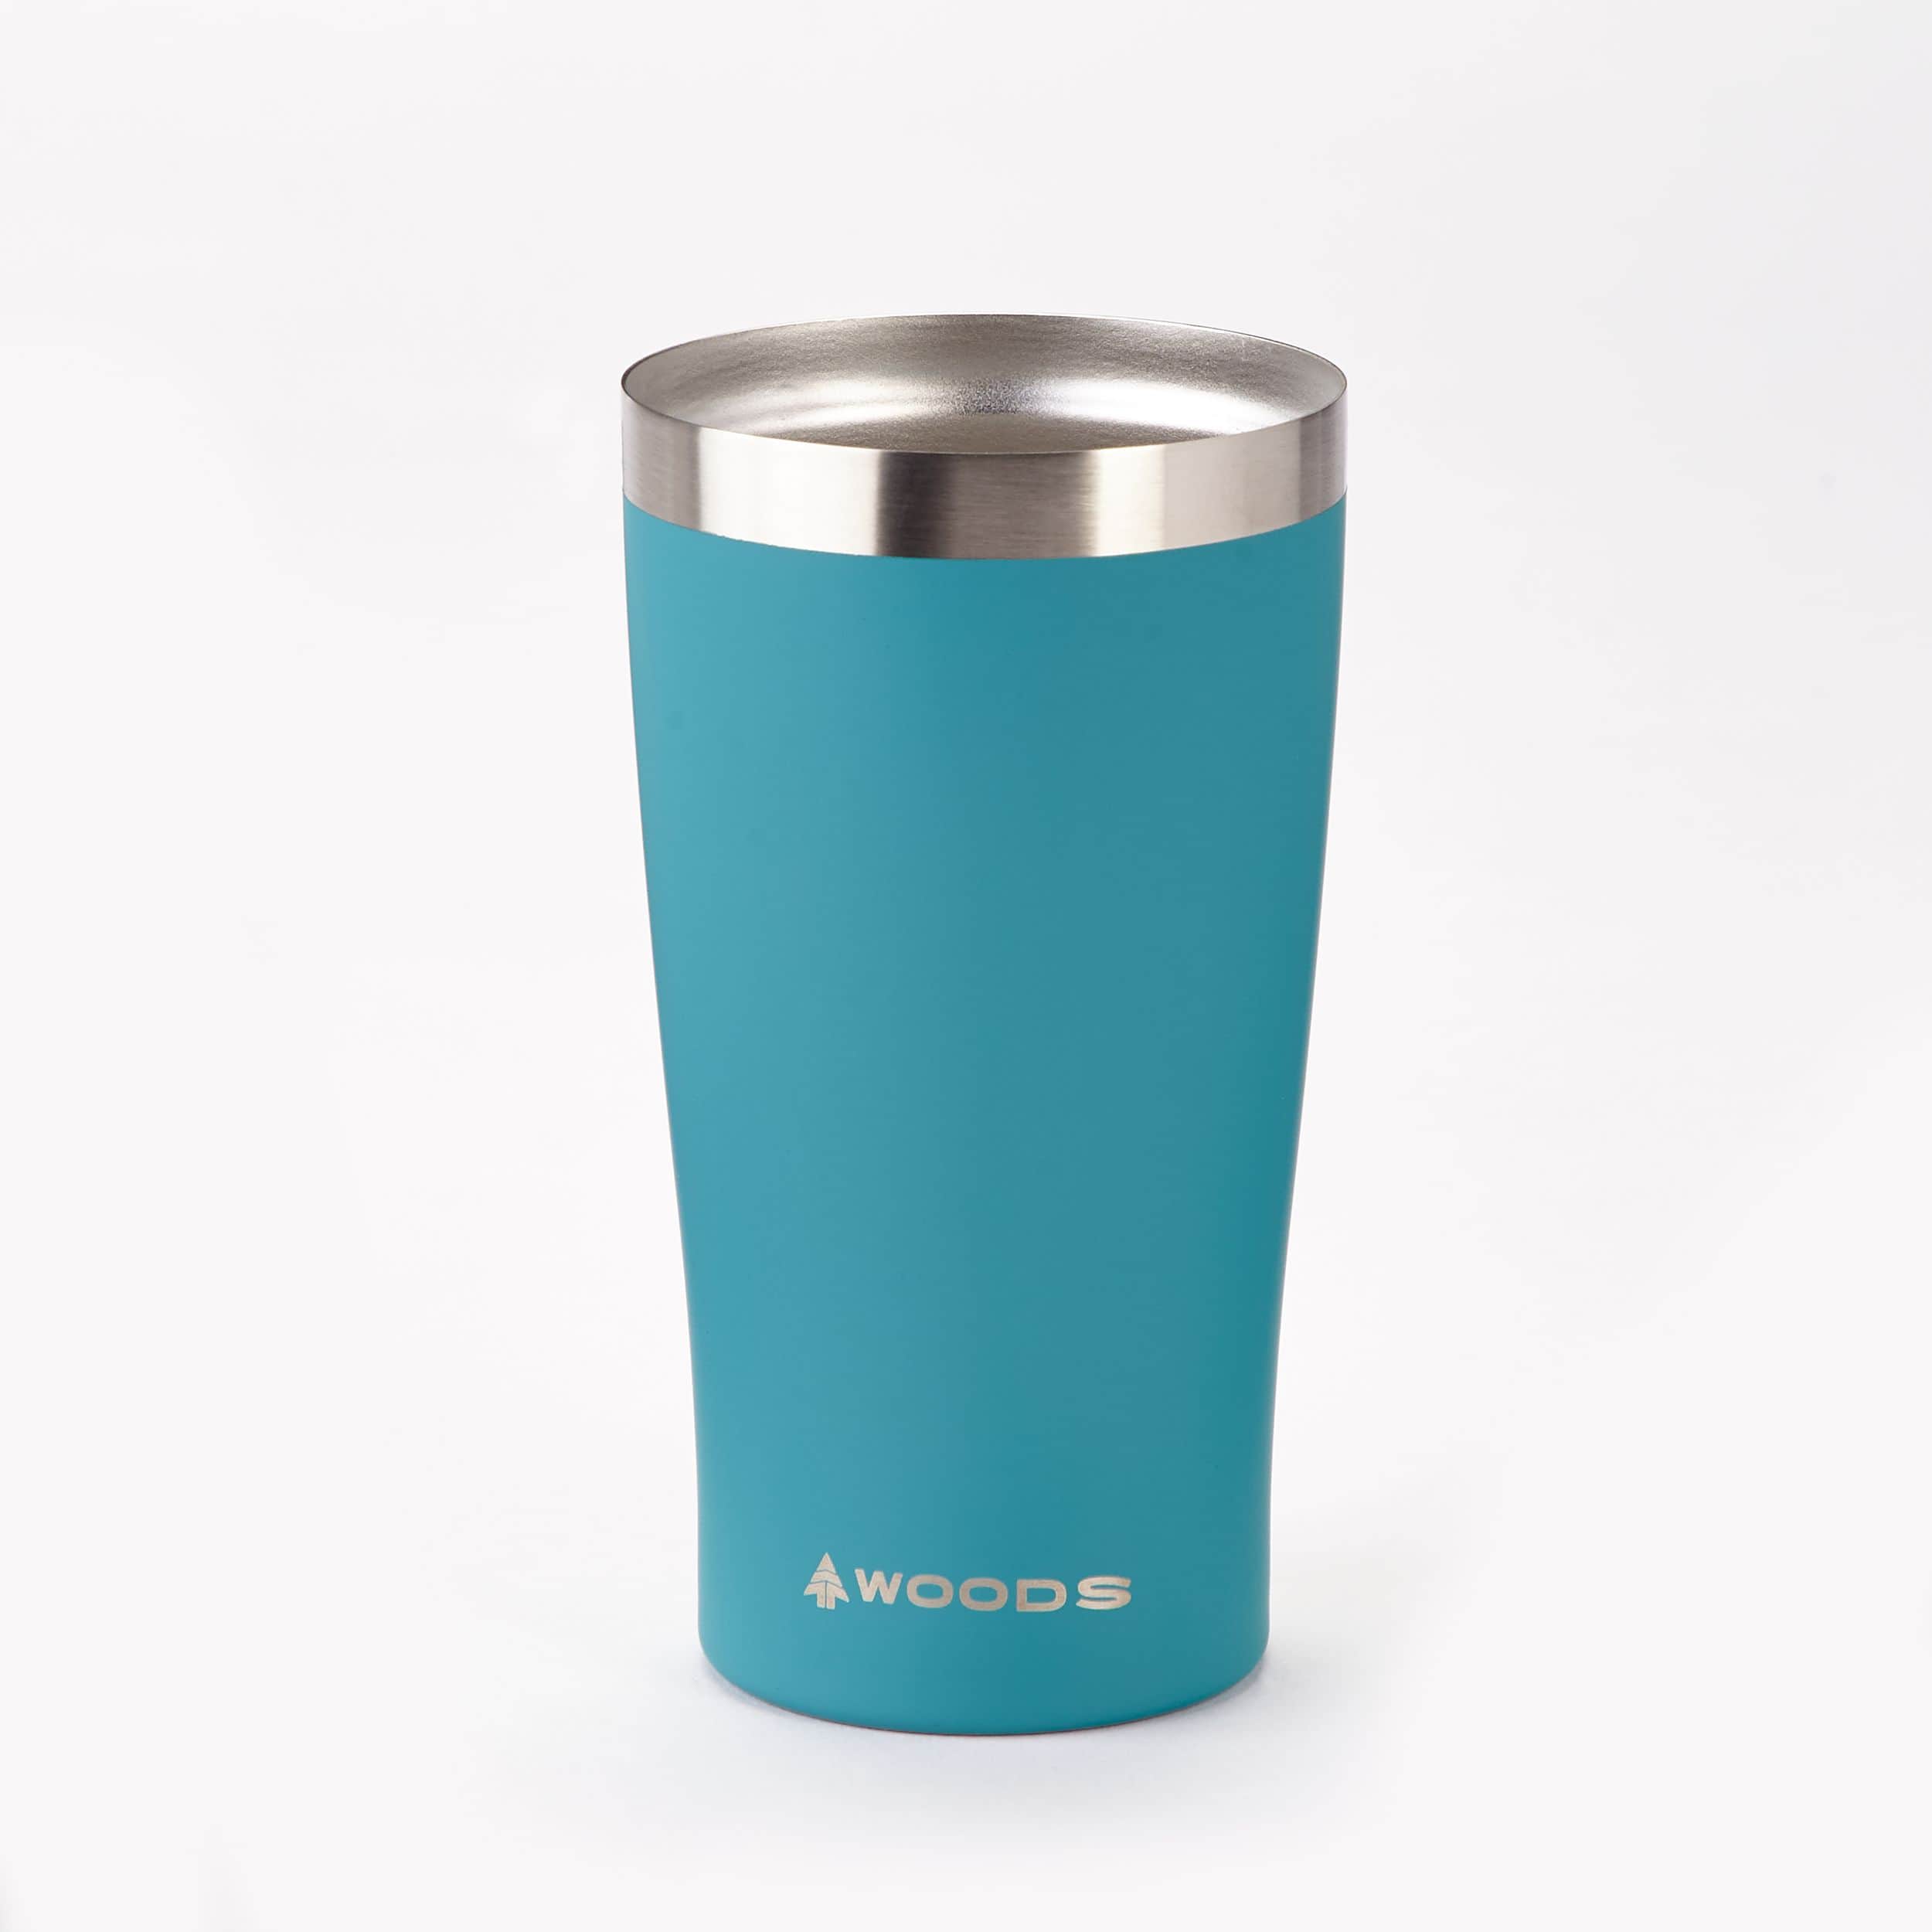 https://media-www.canadiantire.ca/product/playing/camping/camping-living/0763276/woods-450ml-large-wine-tumbler--090d1af1-bd49-45a2-8704-8a7c71279836-jpgrendition.jpg